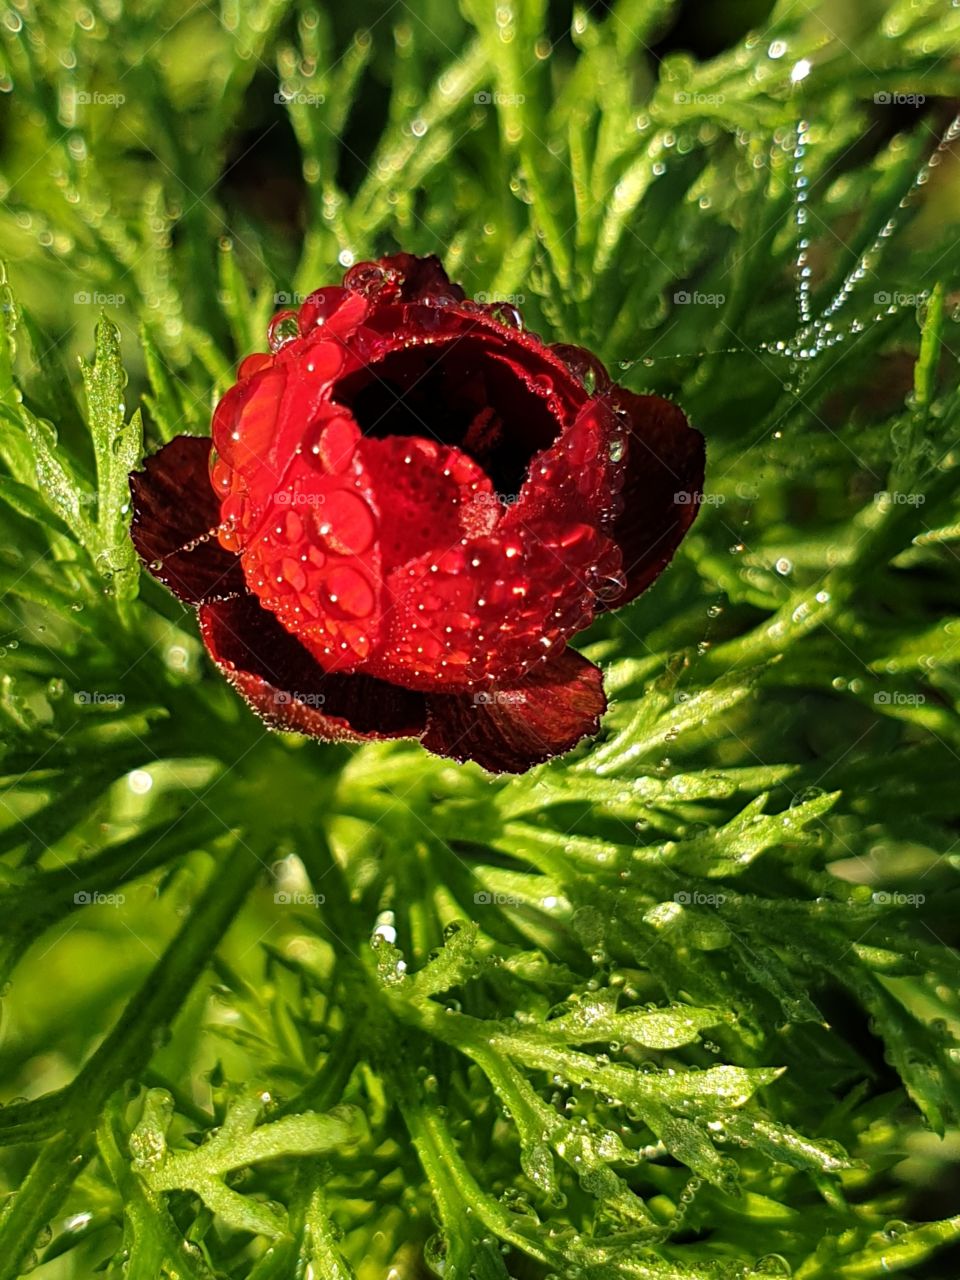 A small, red flower in the garden.